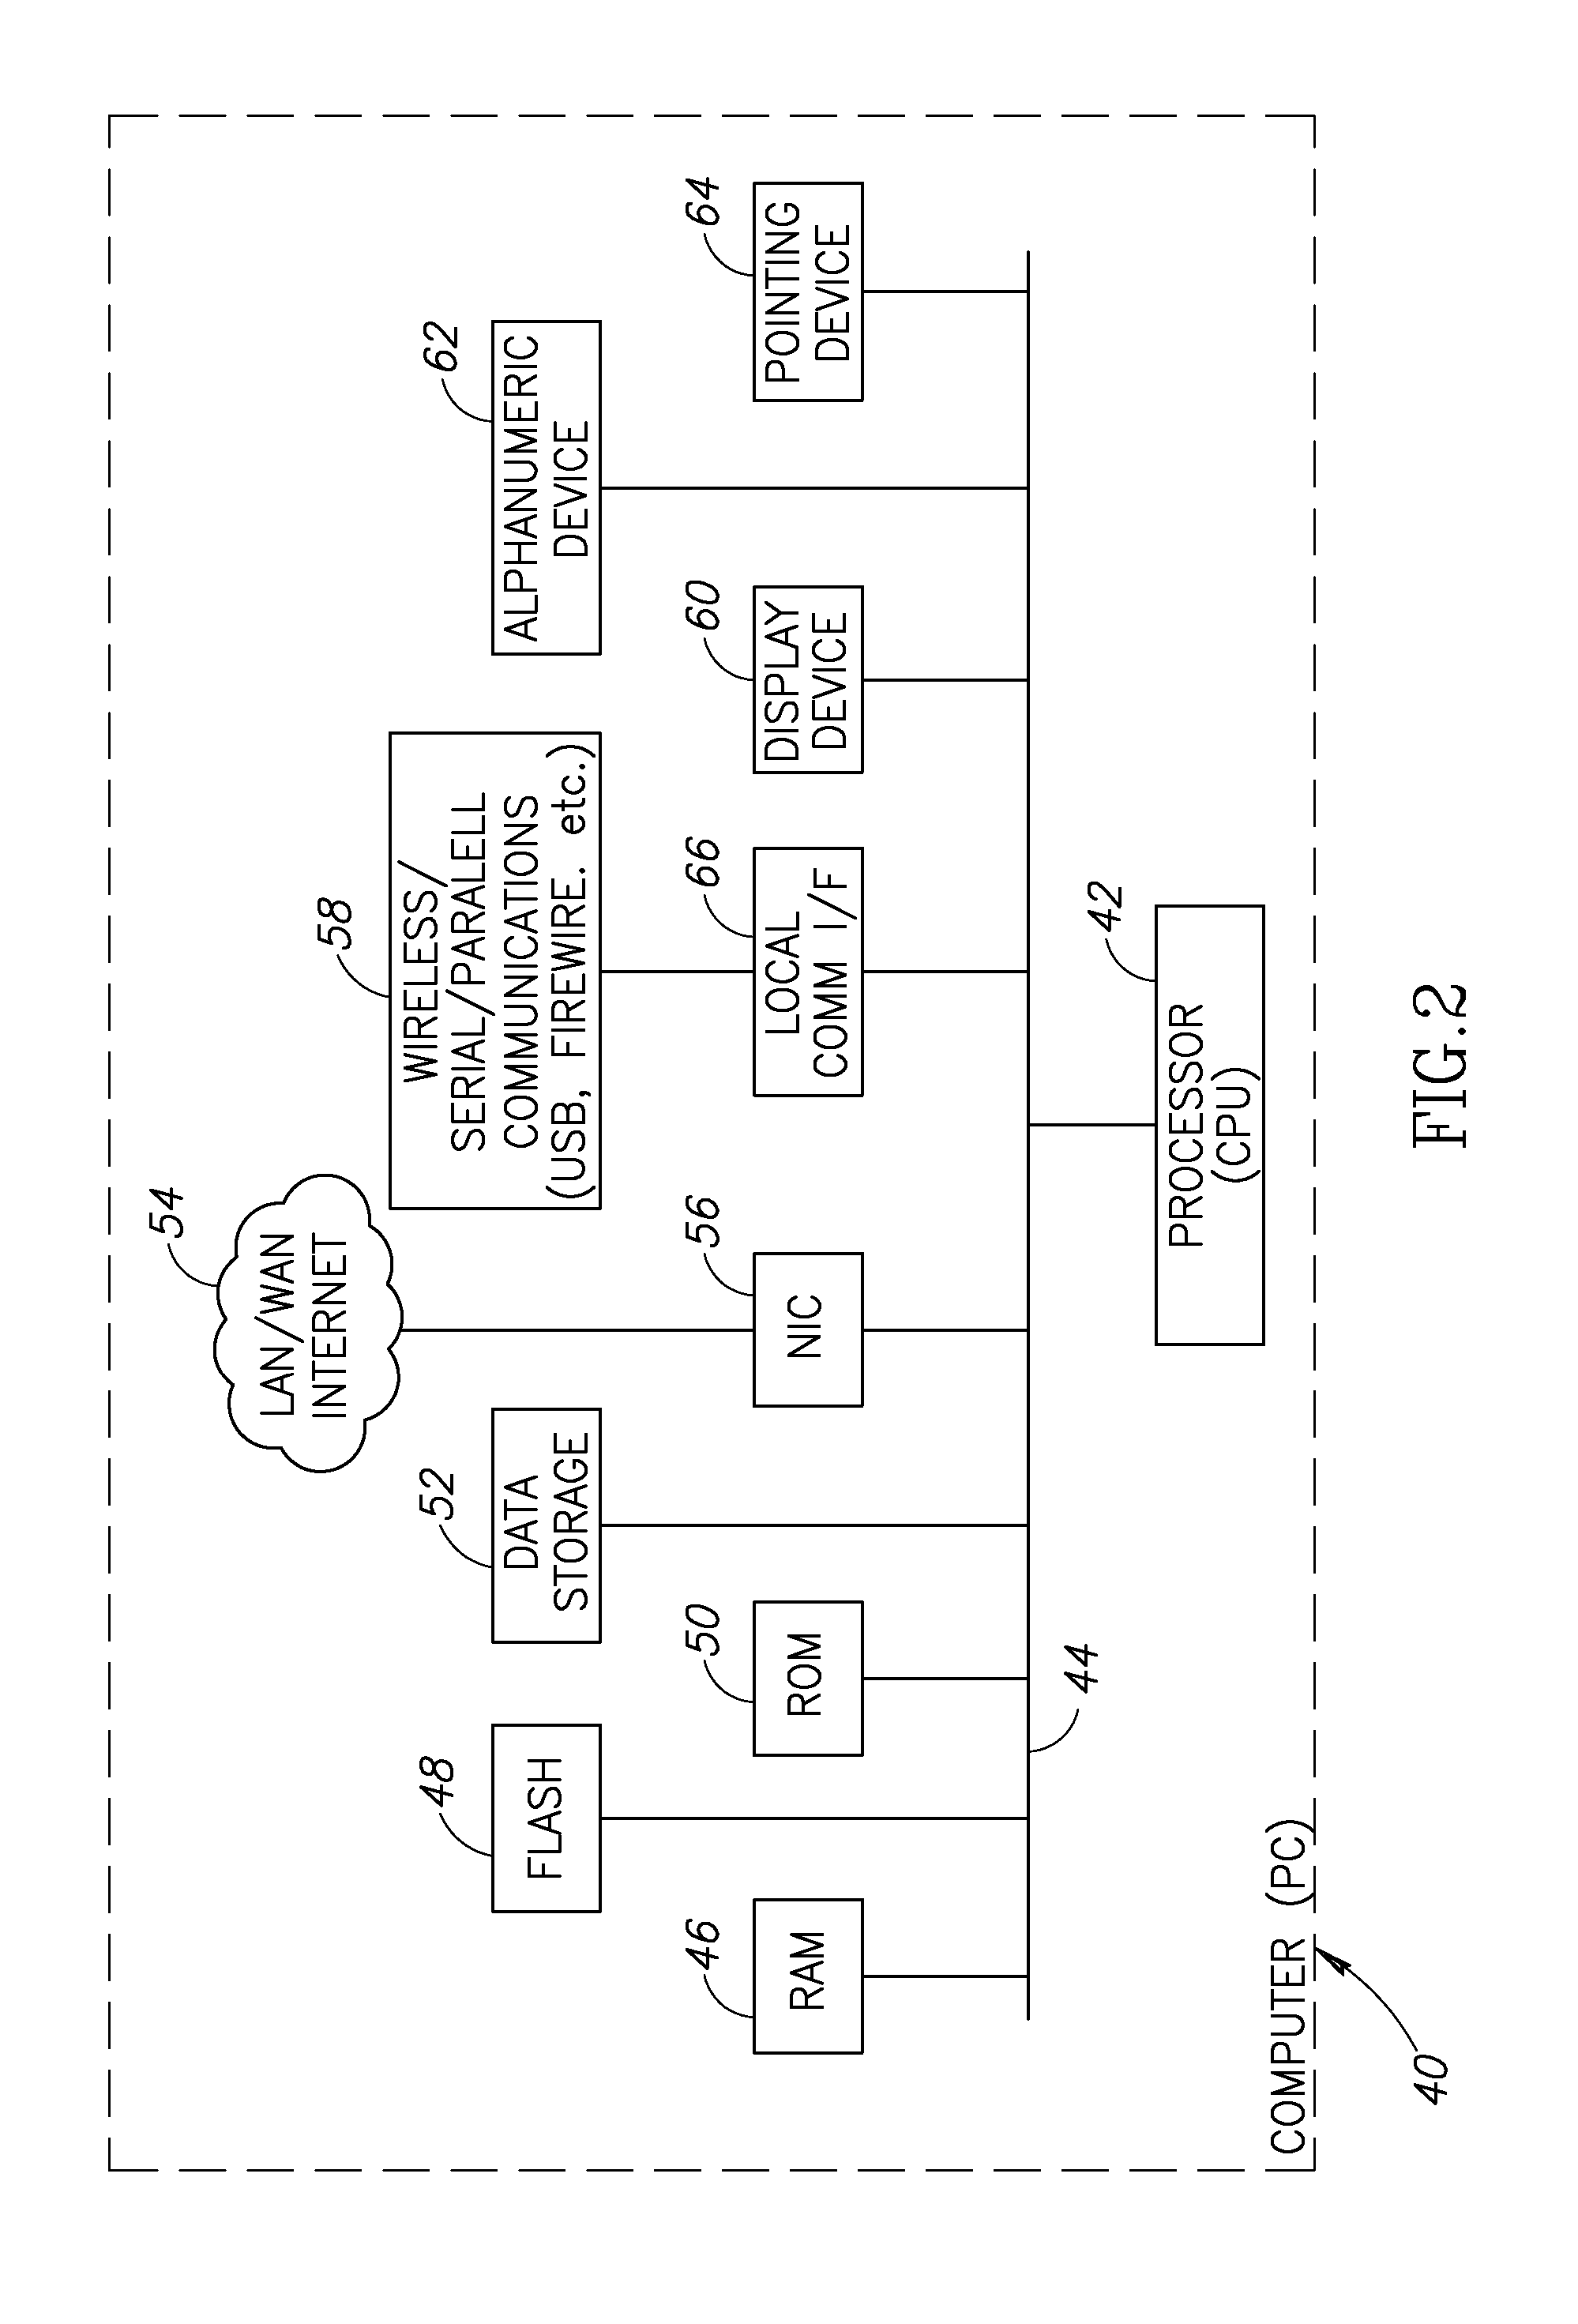 System and method for delivery of PC content through a server based relay system using really simple syndication